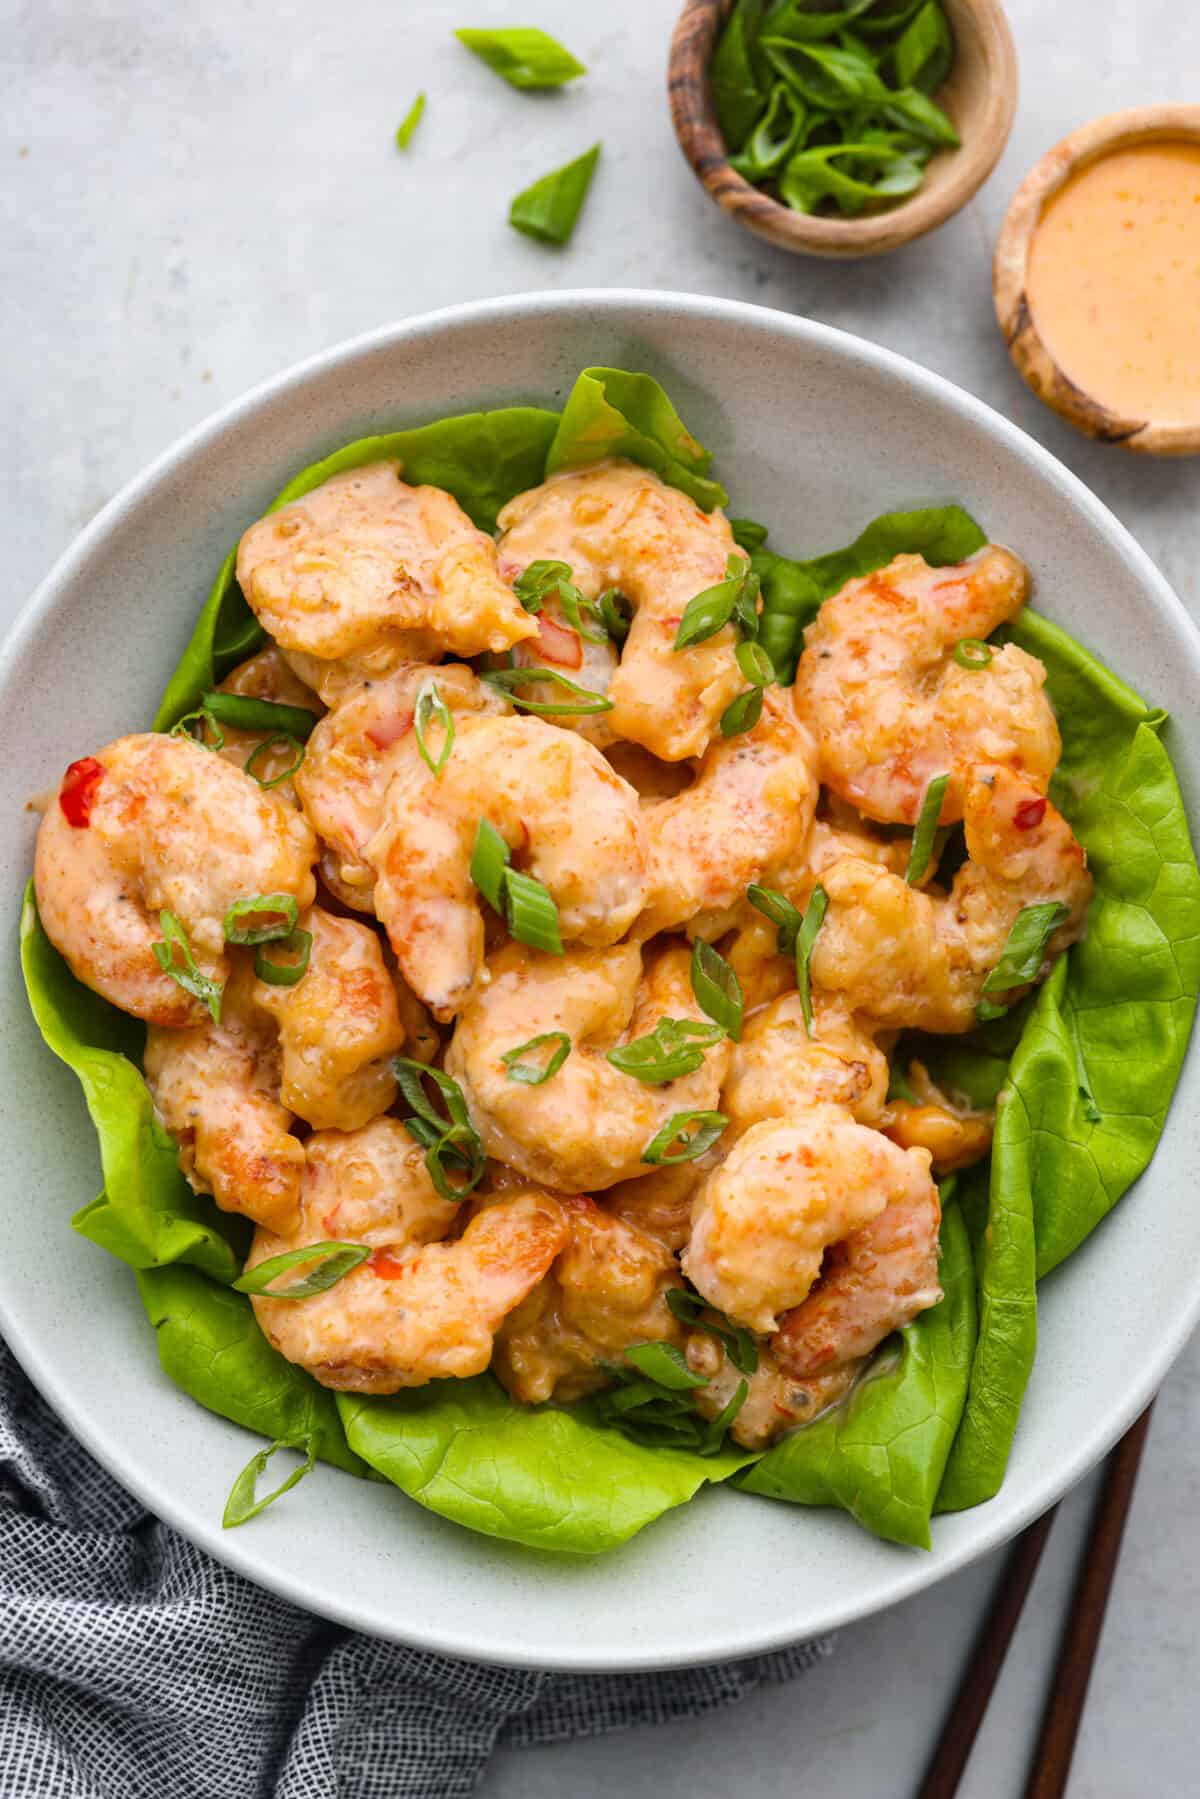 Bang bang shrimp served over a bed of greens in a white bowl.